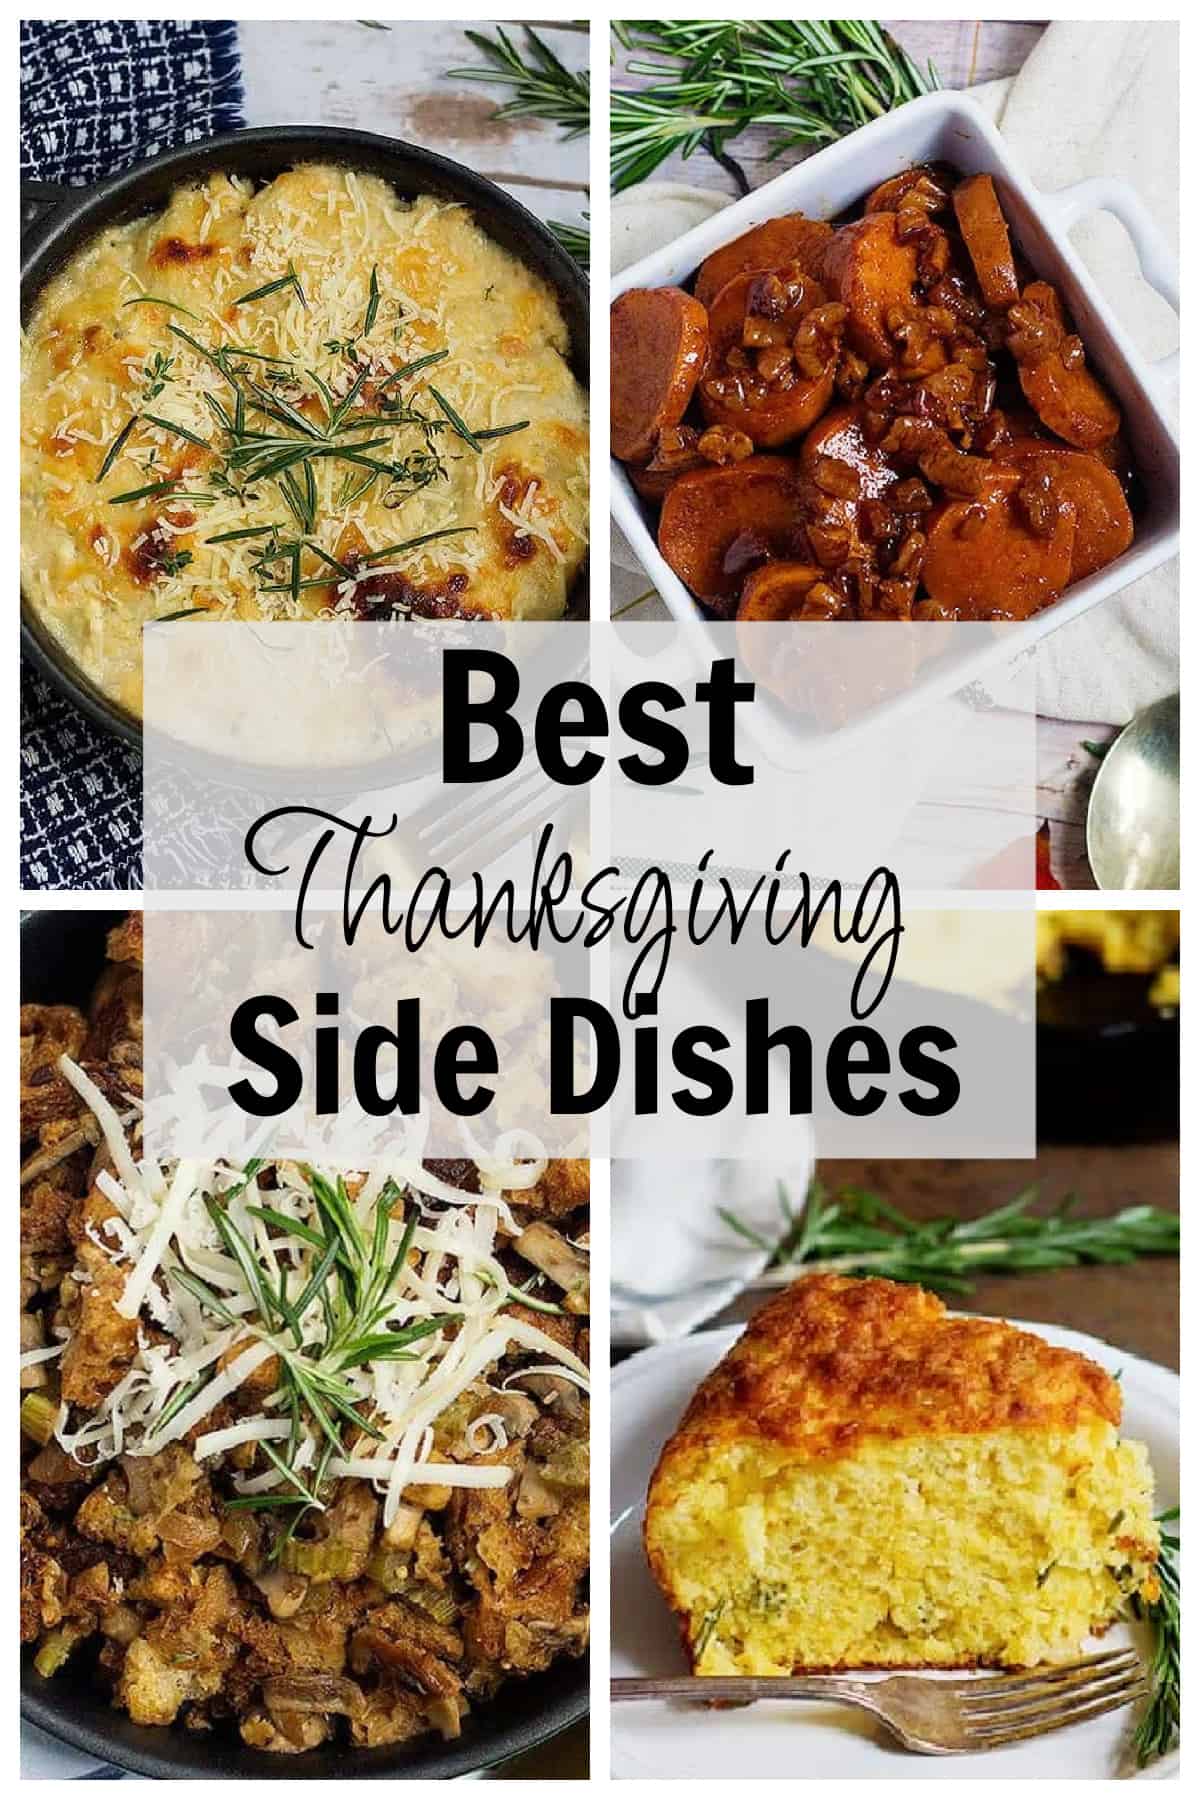 Here is a collection of Thanksgiving side dishes to try! From classics such as mashed potatoes to new flavors such as rosemary cheddar cornbread, we've got you covered! These side dishes are easy to prepare and you can make many of them ahead of time. 